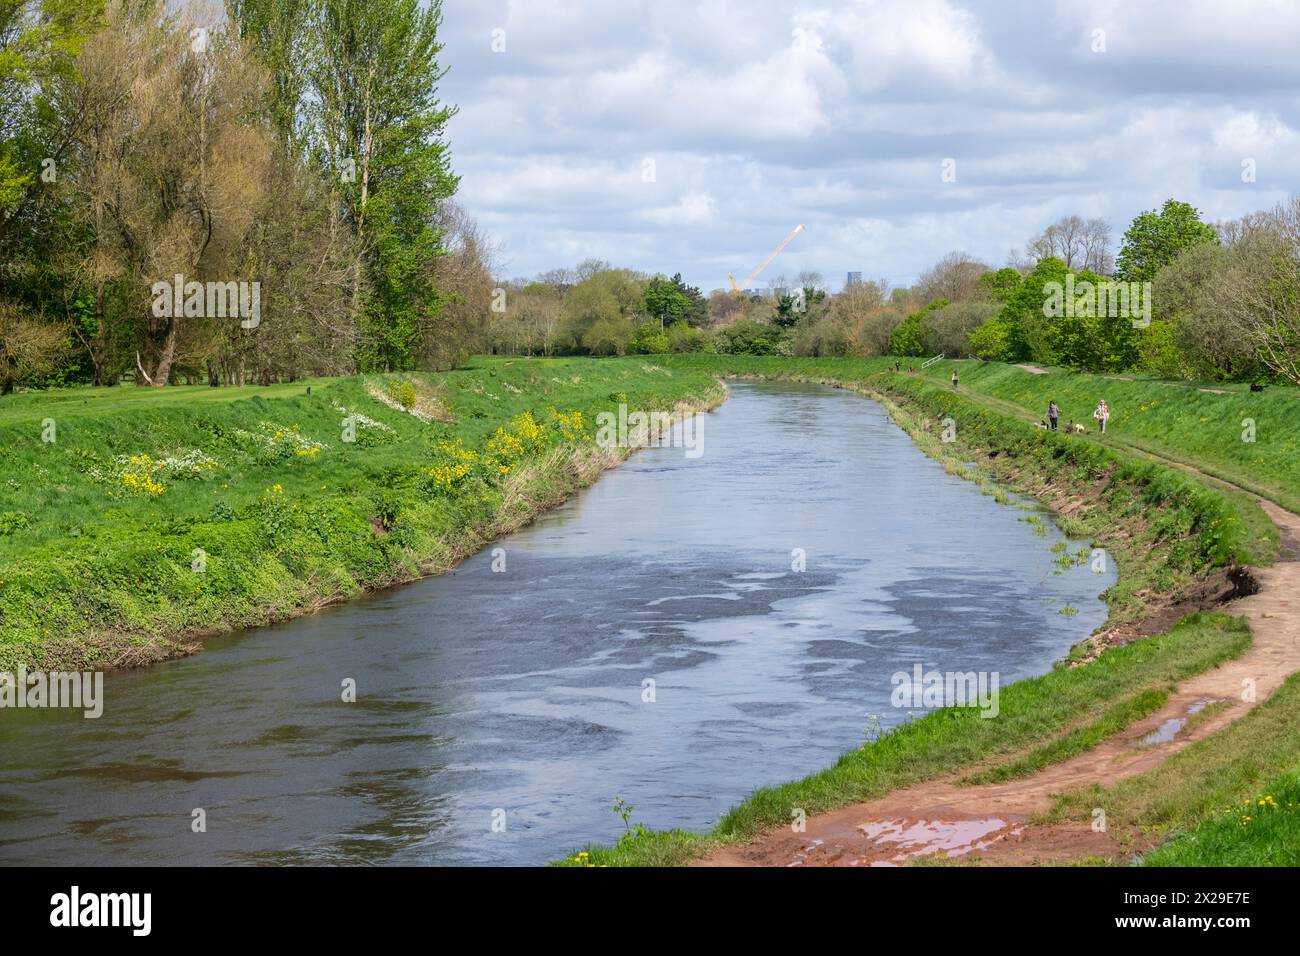 The river Mersey near Northenden in Greater Manchester, England. Popular place for locals to walk along the river bank. Stock Photo